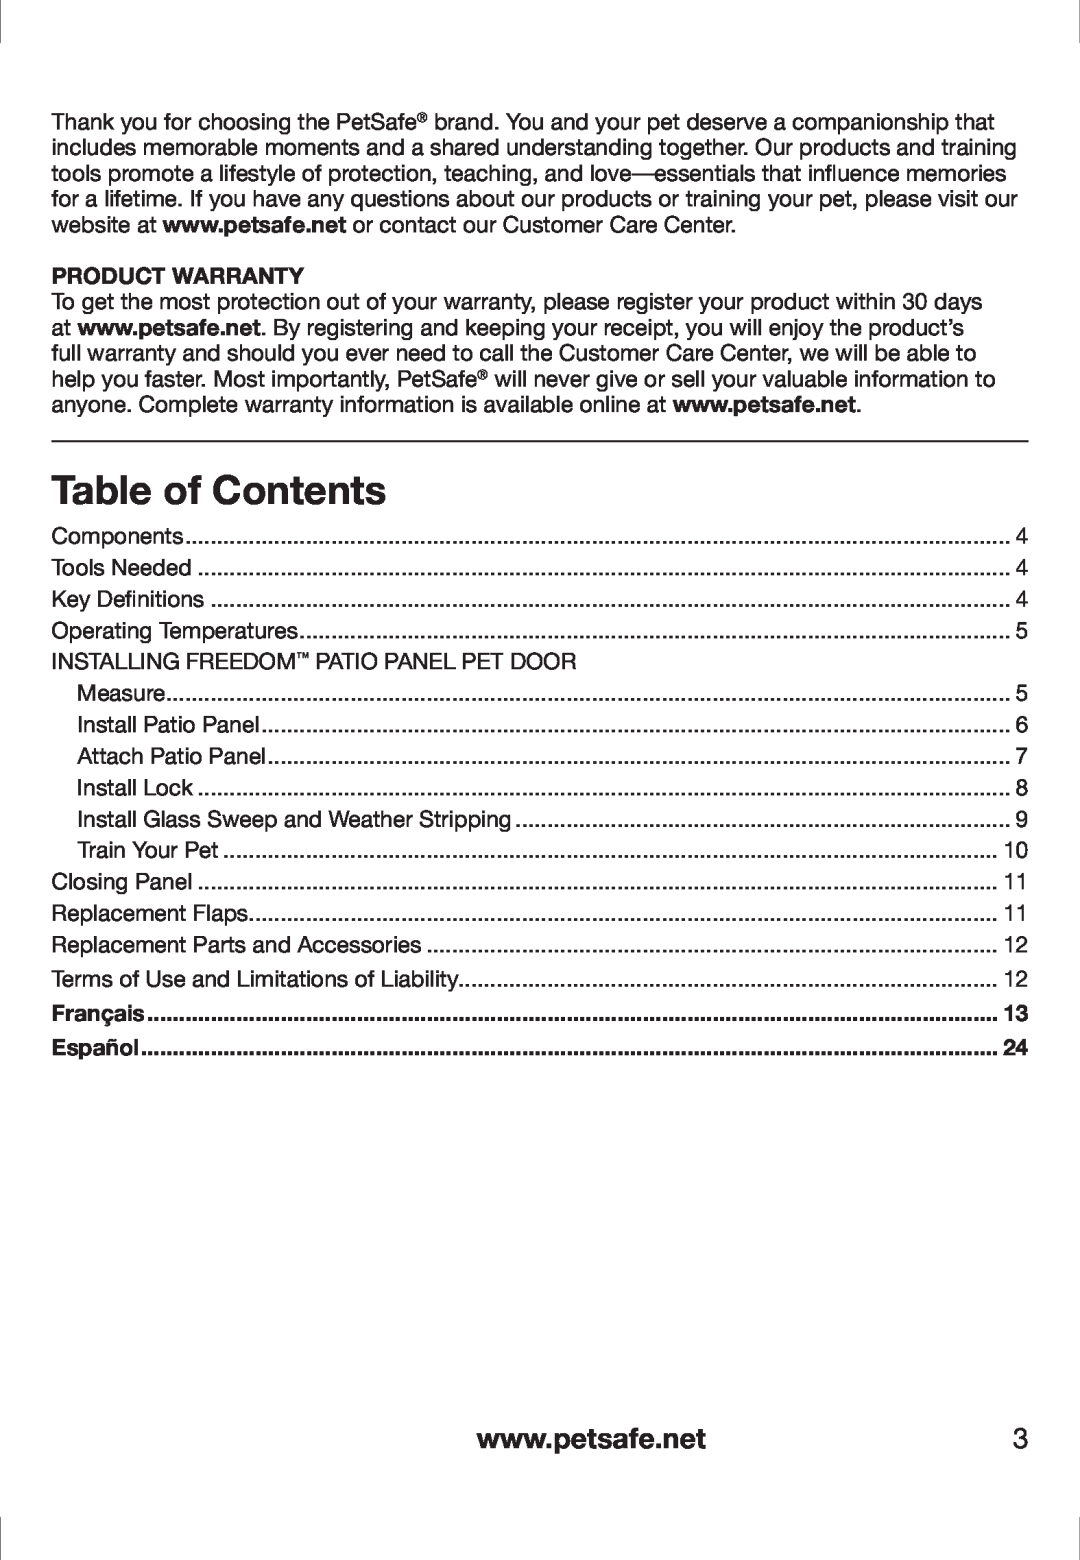 Petsafe PPA11-13129, PPA11-13141, PPA11-13135, PPA11-13134, PPA11-13127, PPA11-13132 Table of Contents, Product Warranty 